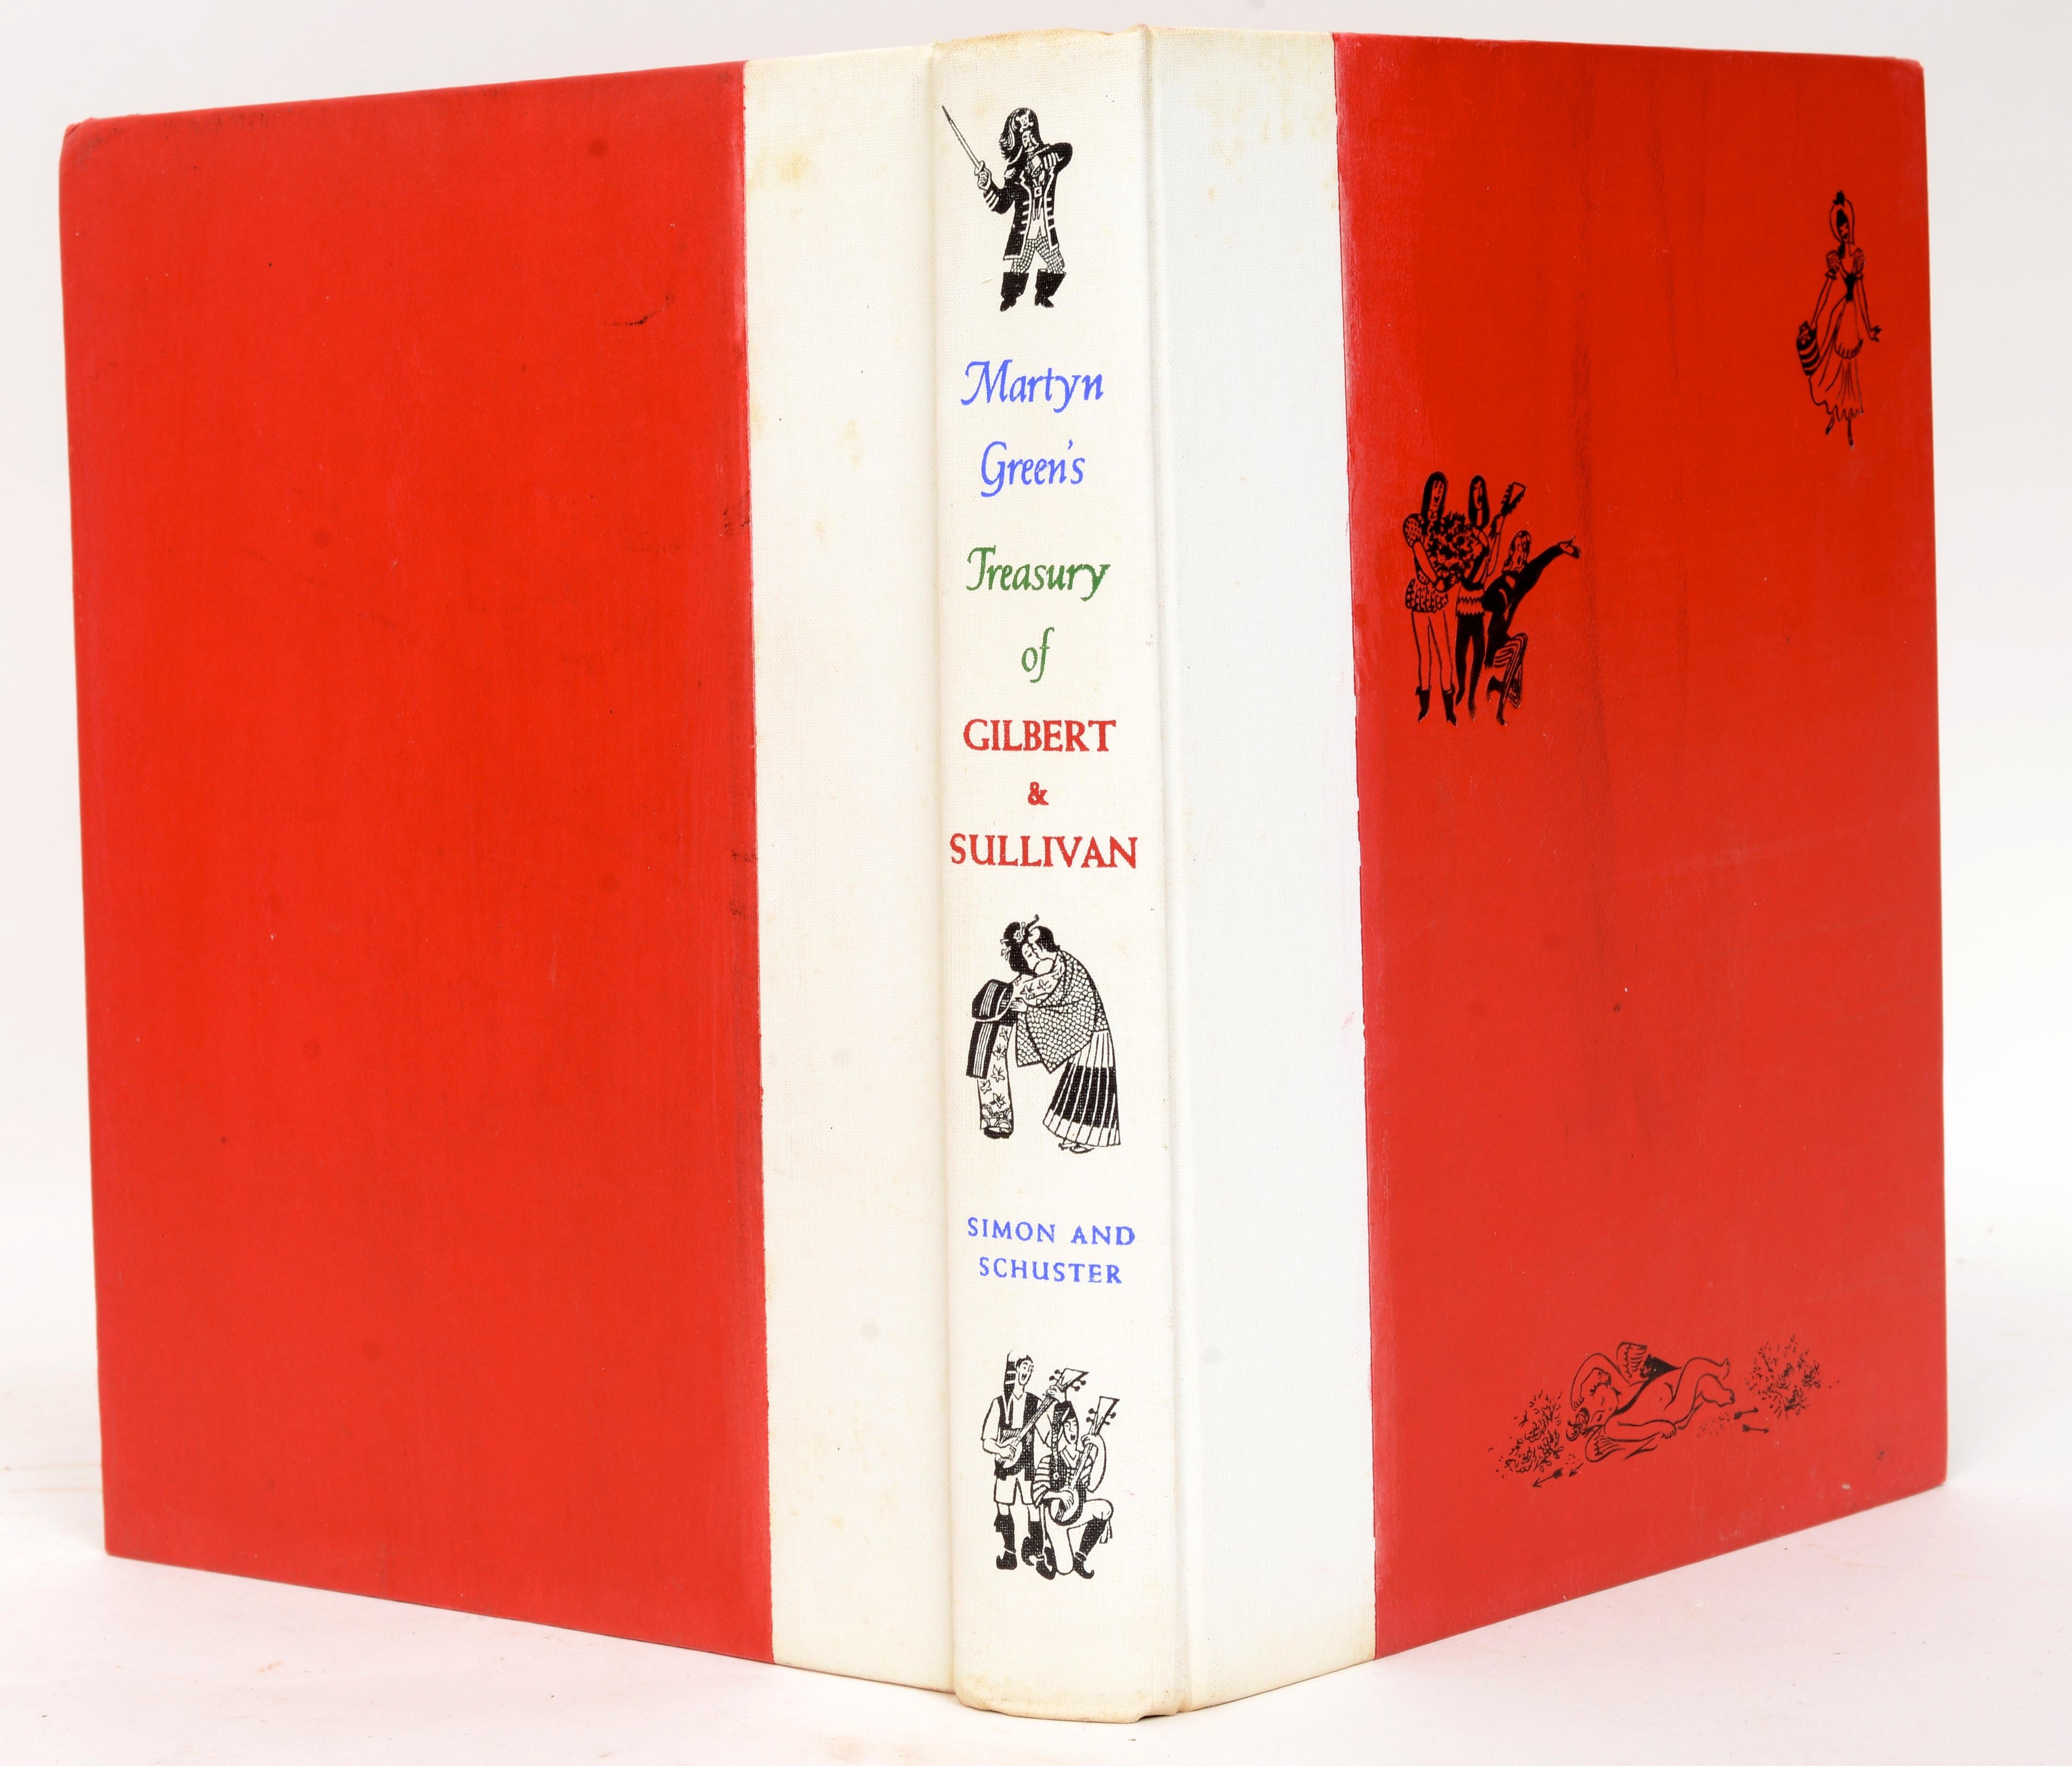 Martyn Green's Treasury of Gilbert and Sullivan by Martyn Green. Simon & Shuster, New York, 1961. Stated 1st printing hardcover with Gaylord dust jacket. William Martyn-Green, better known as Martyn Green, was an English actor and singer. He is best